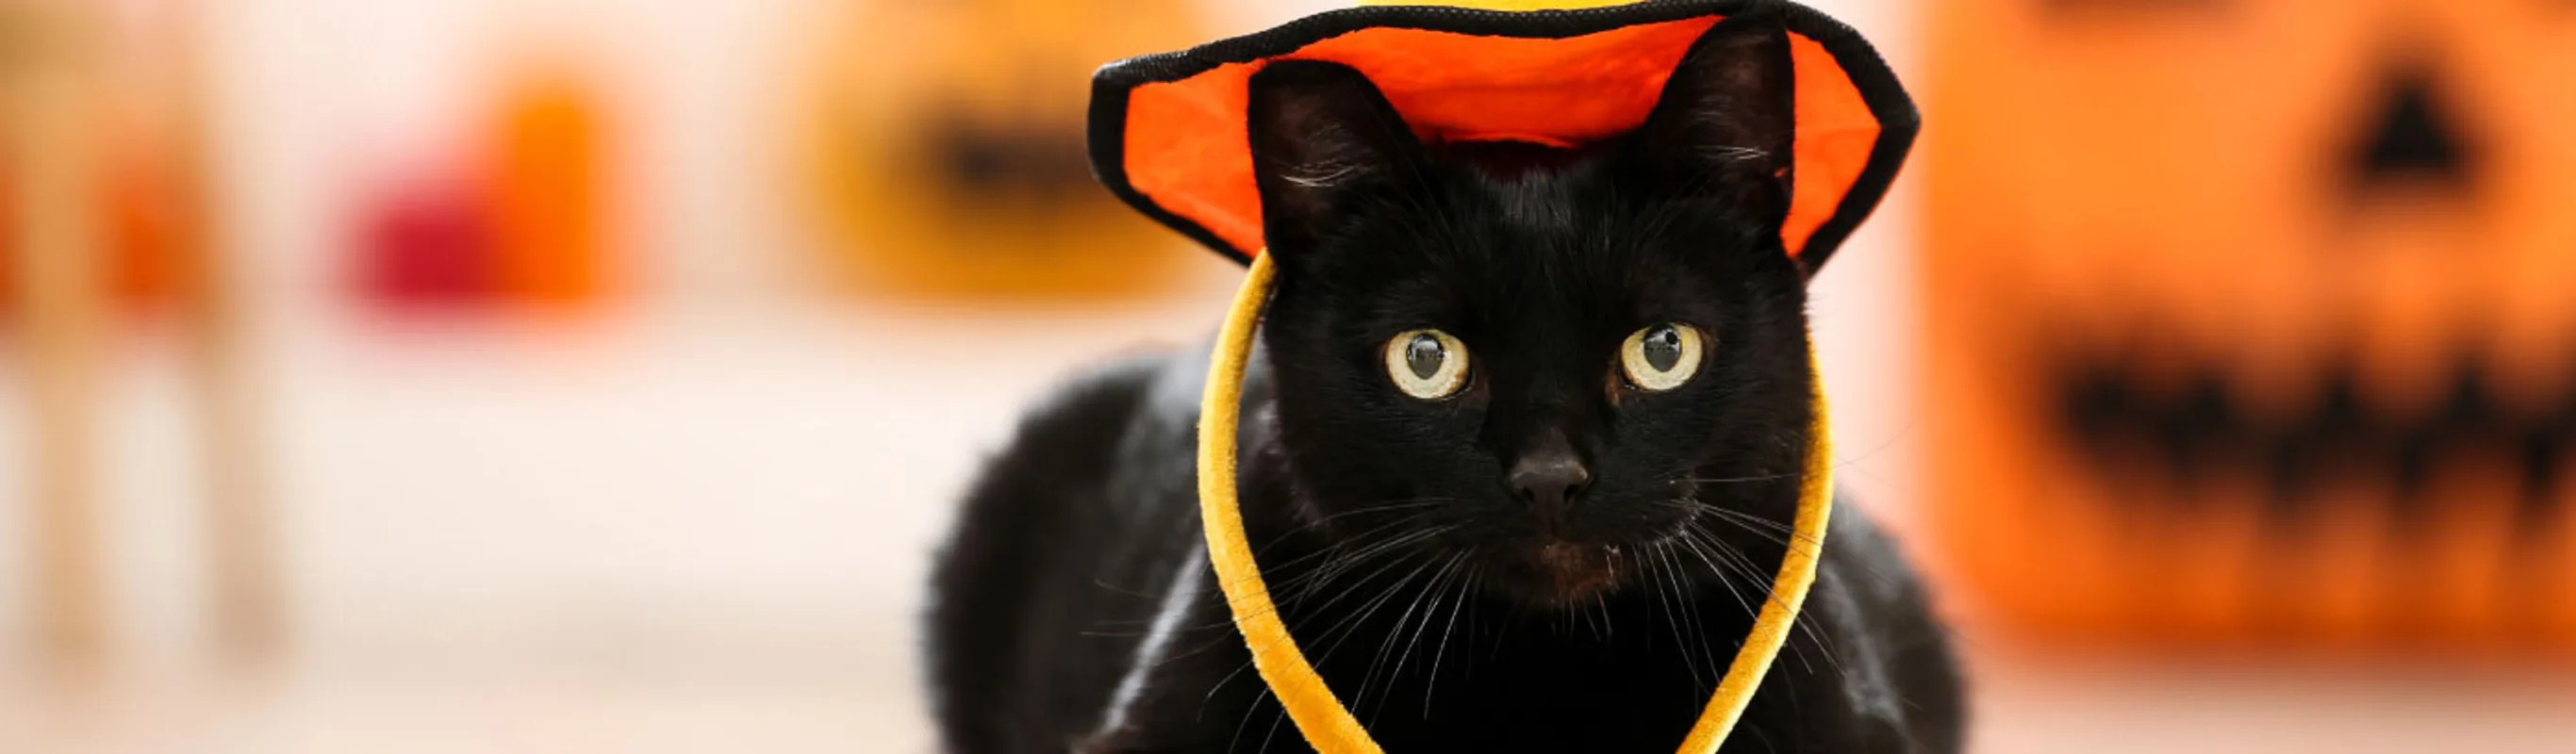 Black cat wearing an orange witches hat for Halloween.